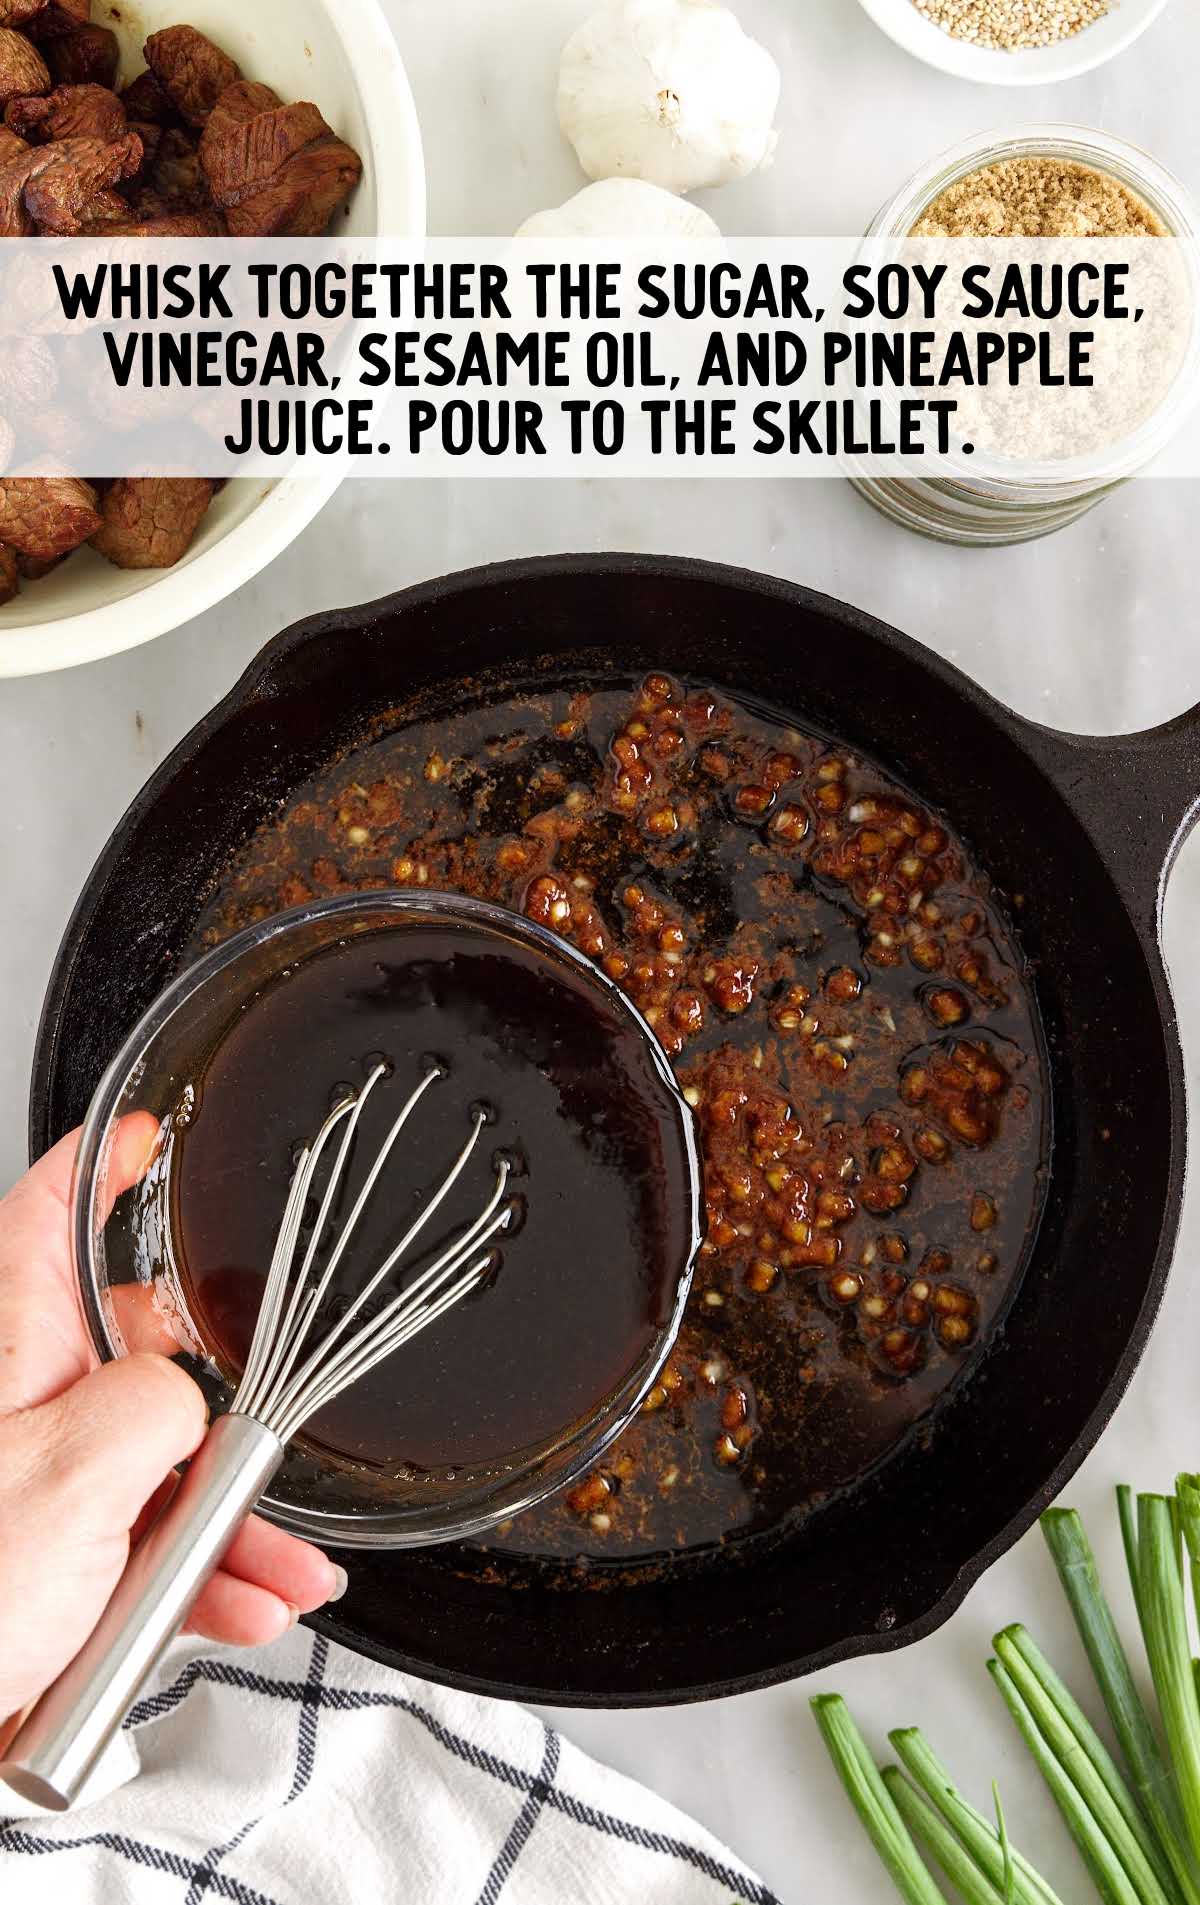 sugar, soy sauce, vinegar, sesame oil, and pineapple juice whisked in a skillet